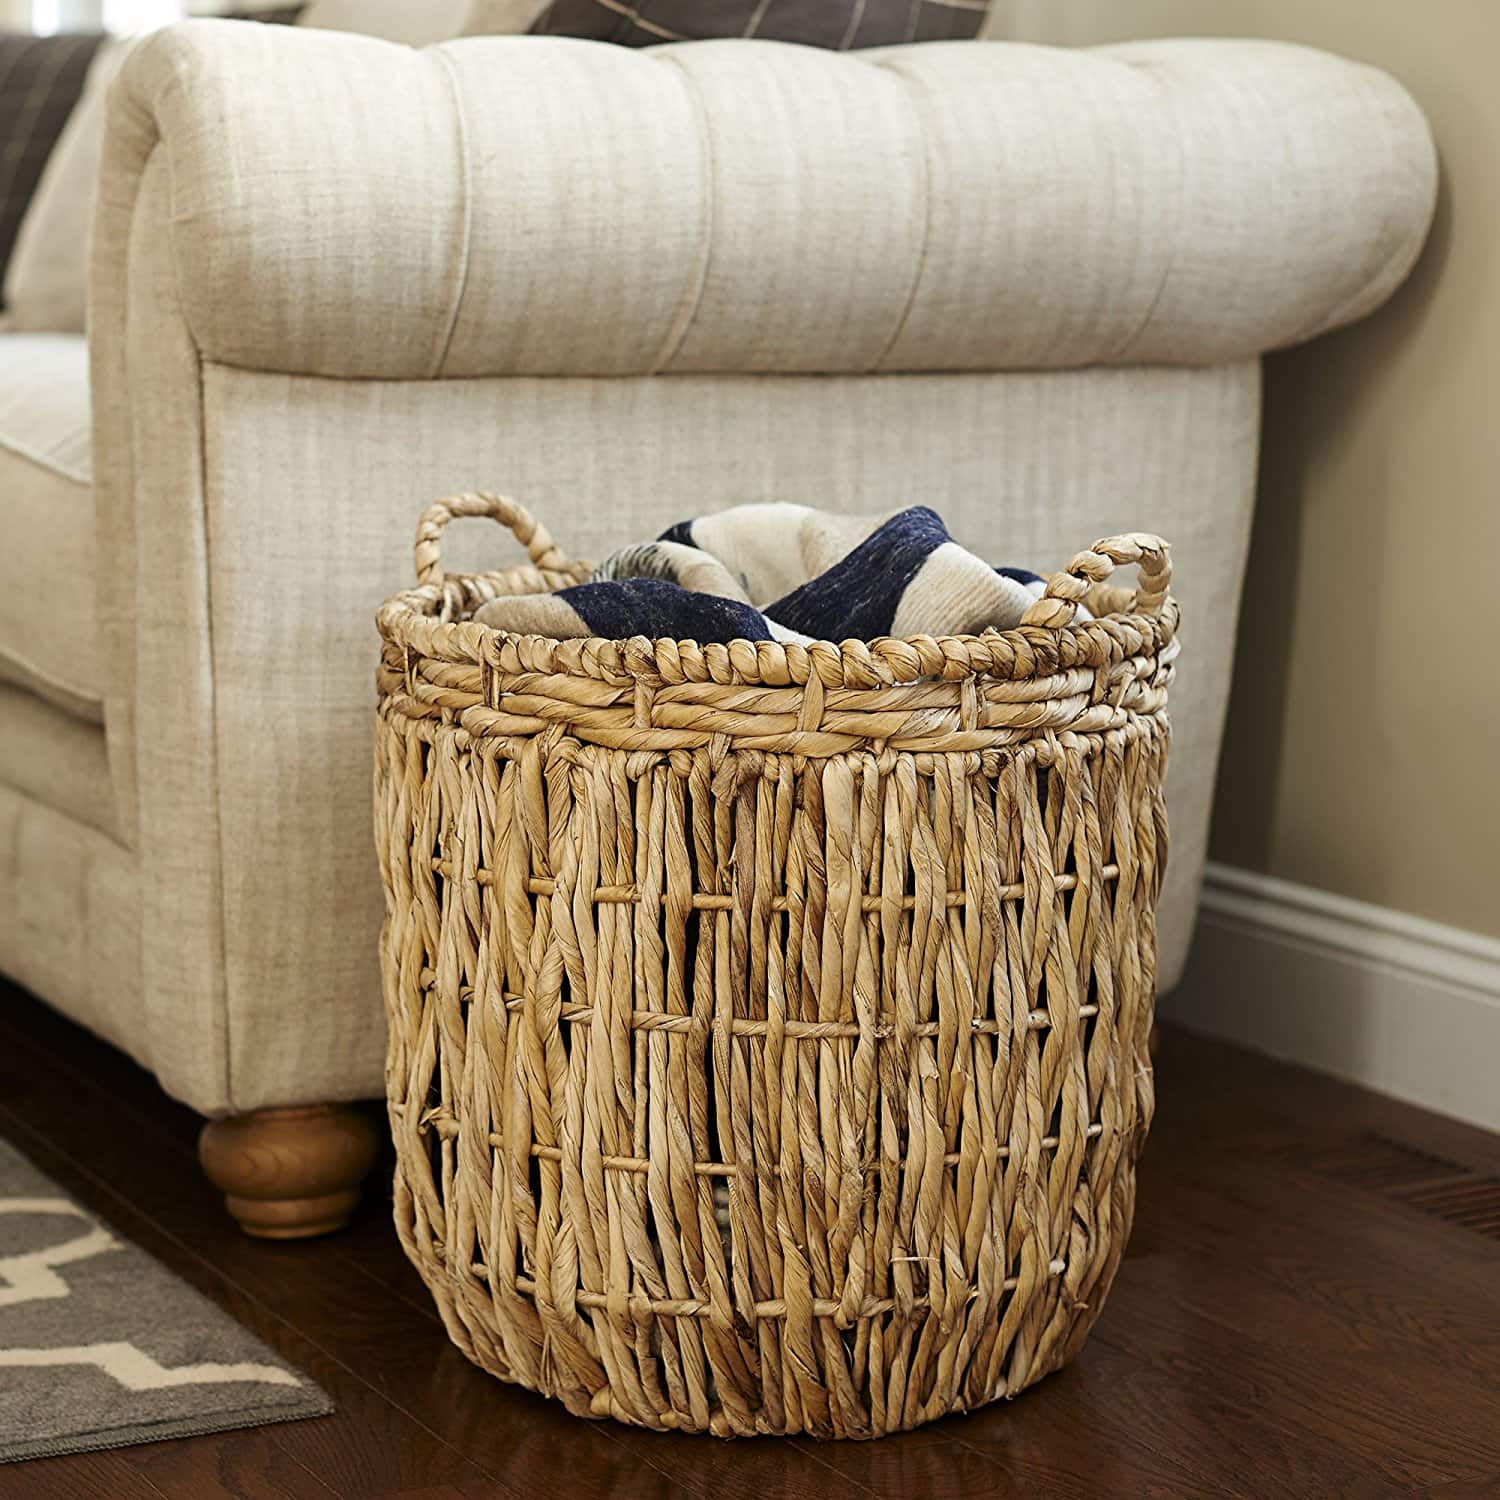 Knowing how to organize with baskets is crucial for our home to stay organized, and not look cluttered. Great ideas here!